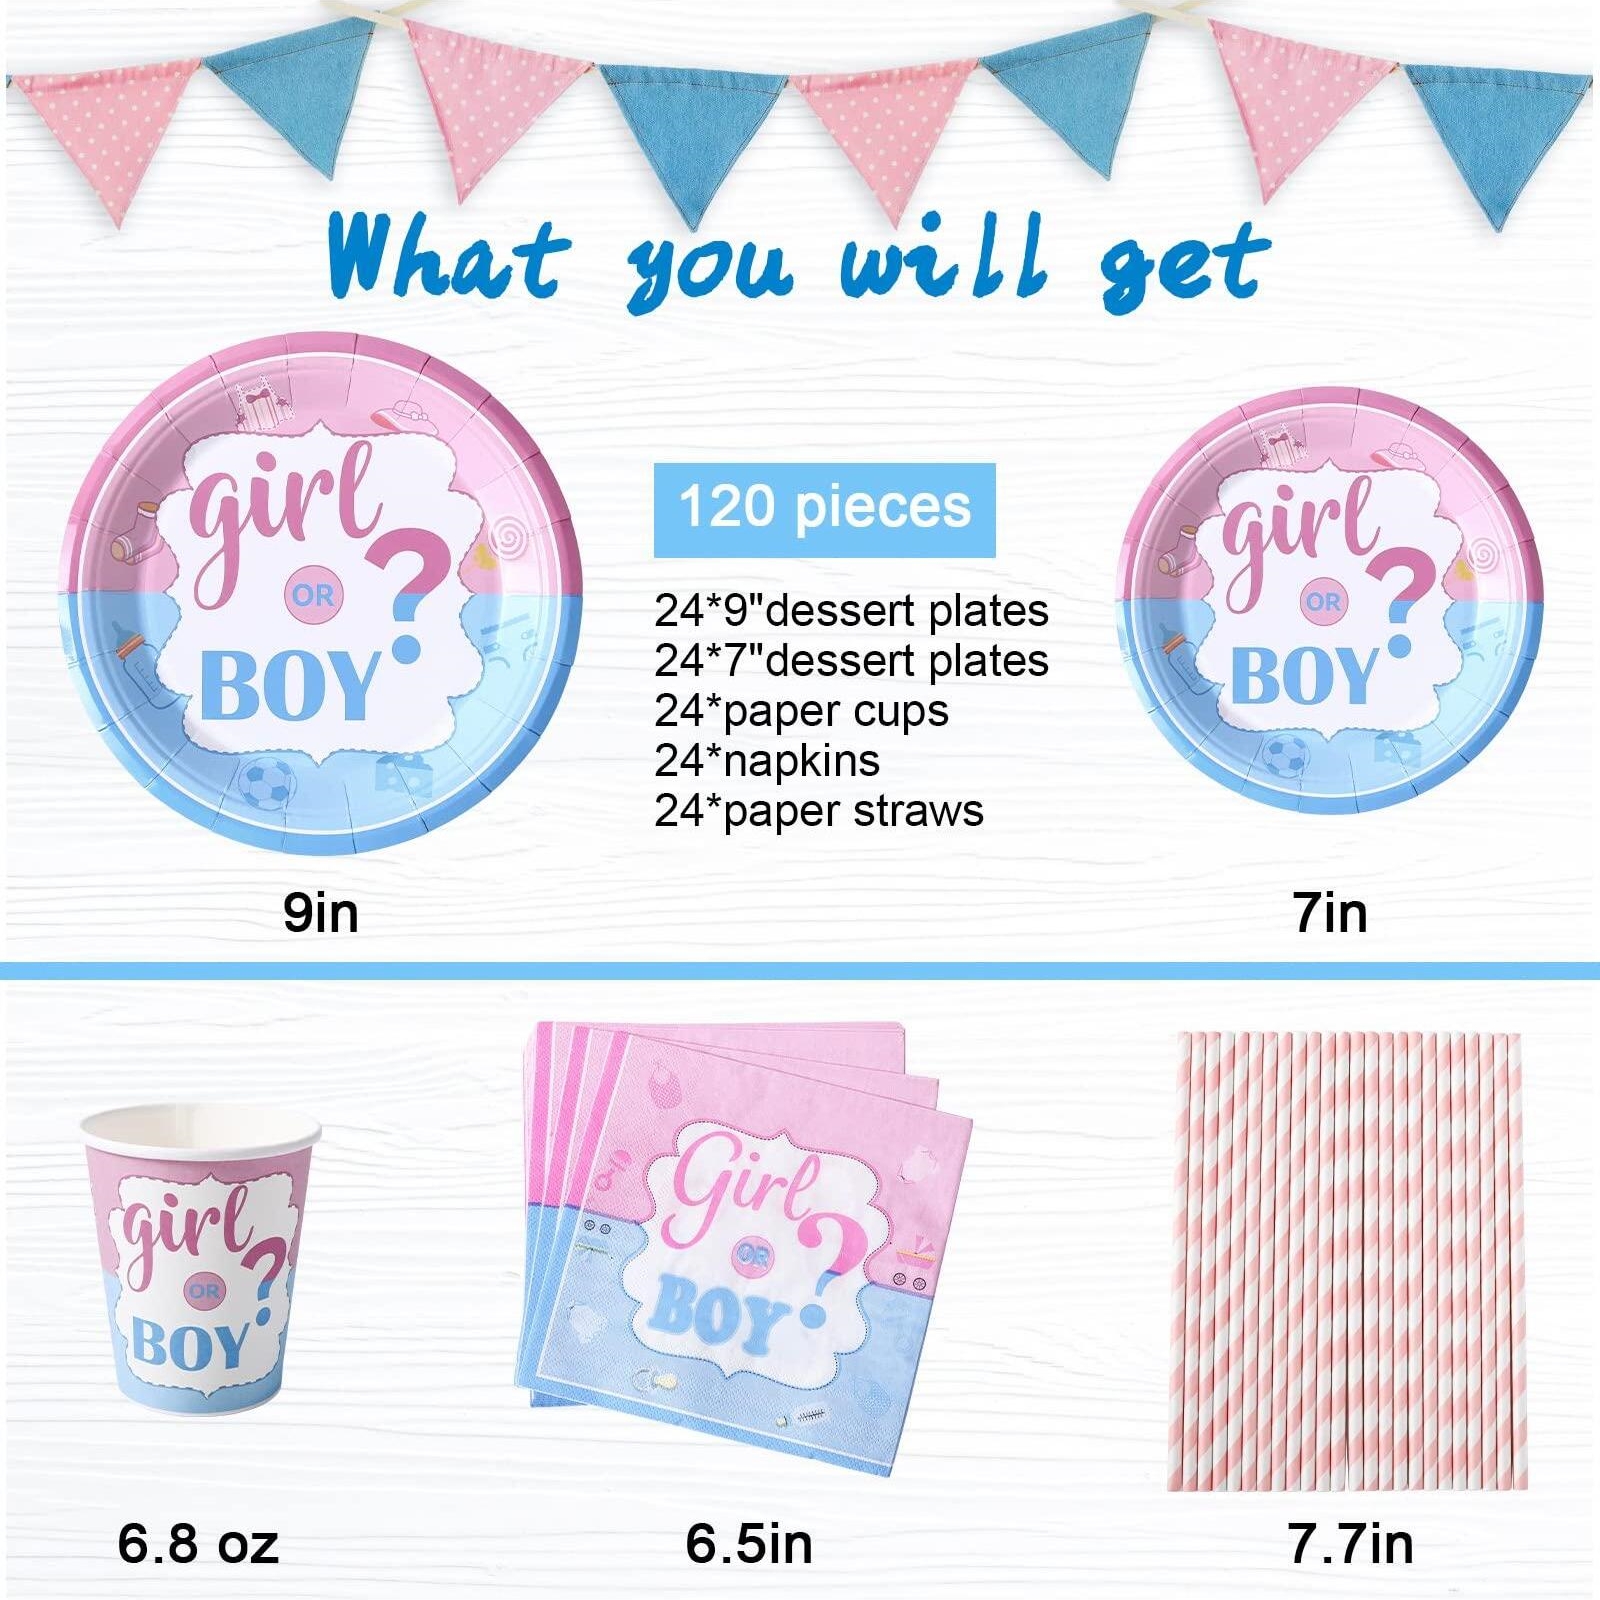 WSBArt 120PCS 24 Guests Gender Reveal Plates Tablewares Supplies, Includes Disposable Paper Plates, Cups, Napkins and Straws, Boy or Girl for Party Dinnwares Decorations - image 2 of 6